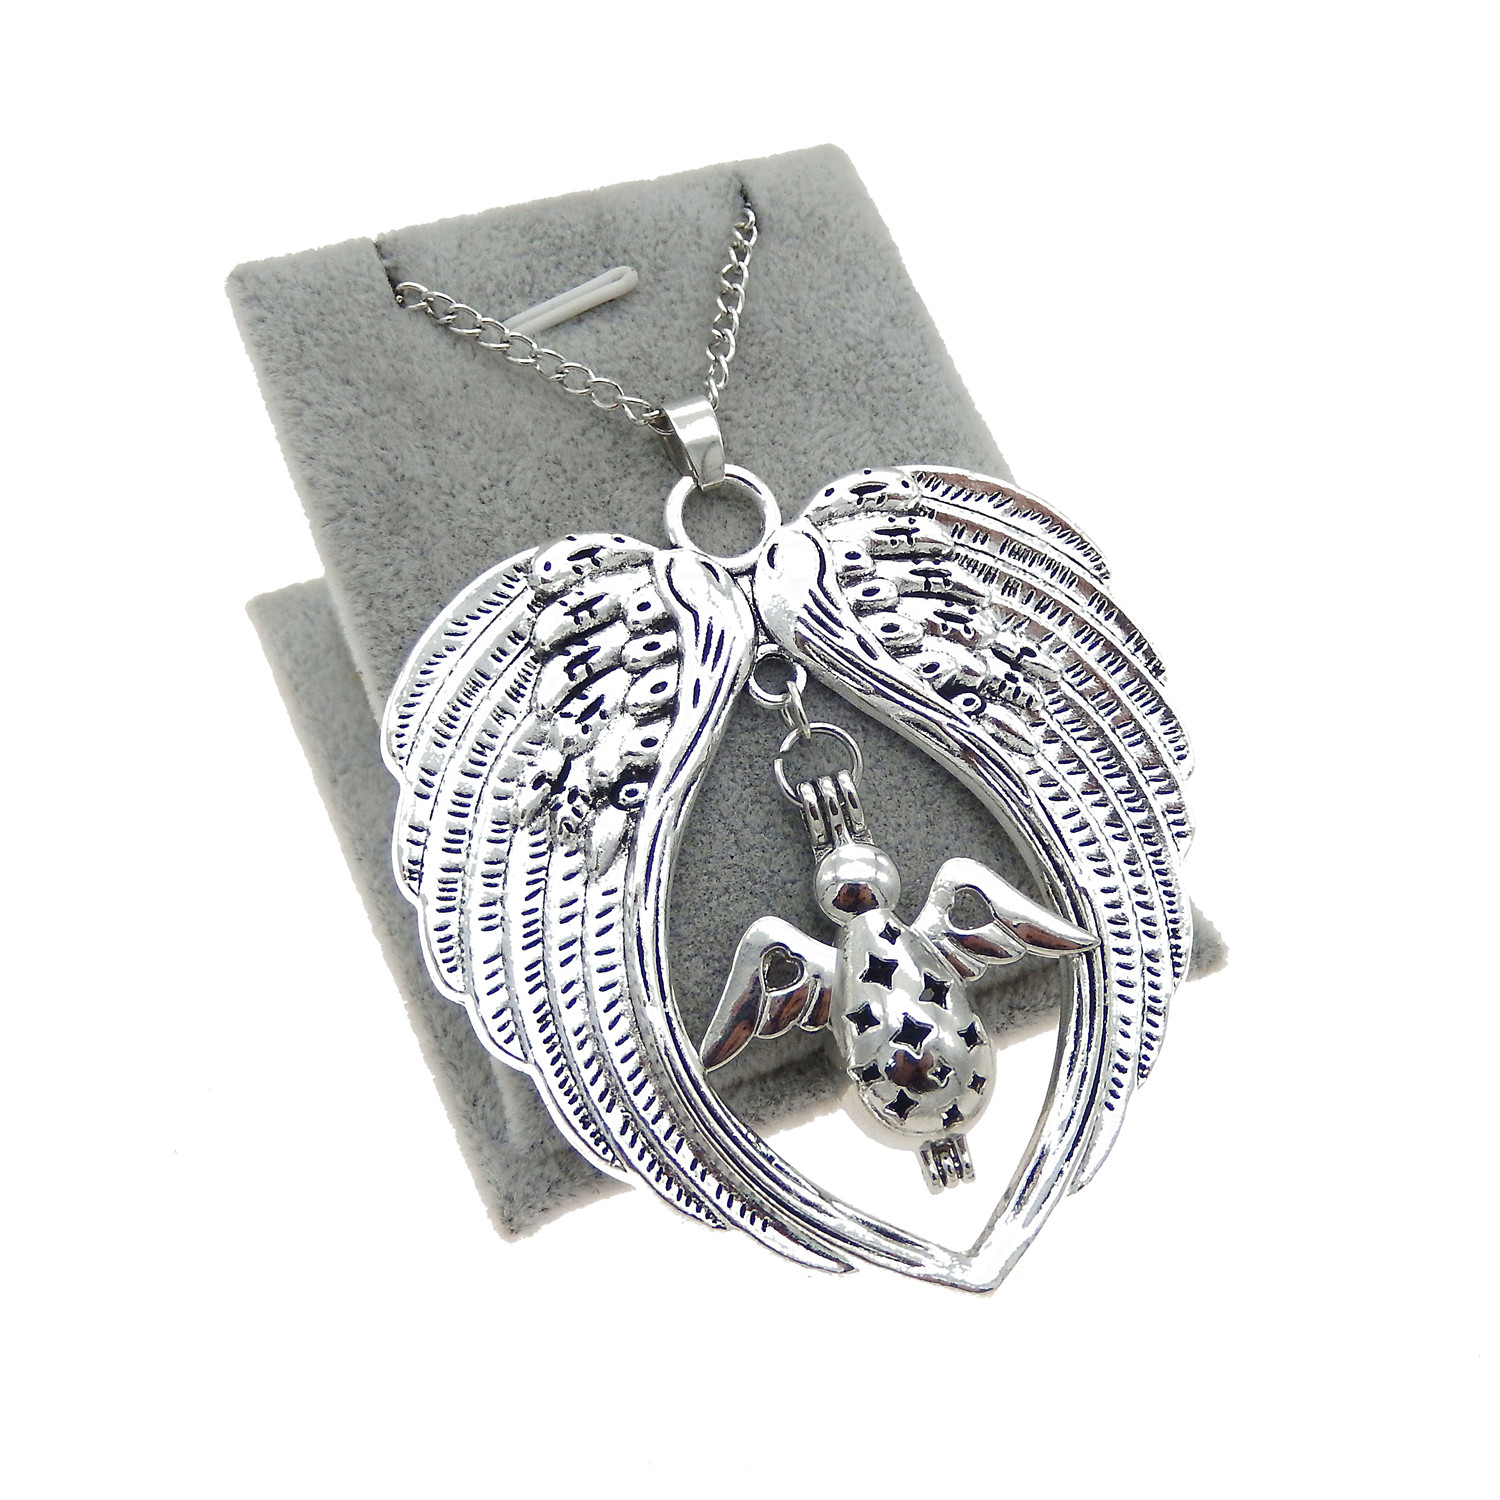 1 x Silver Alloy Winged Heart Dangle Pendant Angel Locket Necklace Jewelry Gifts